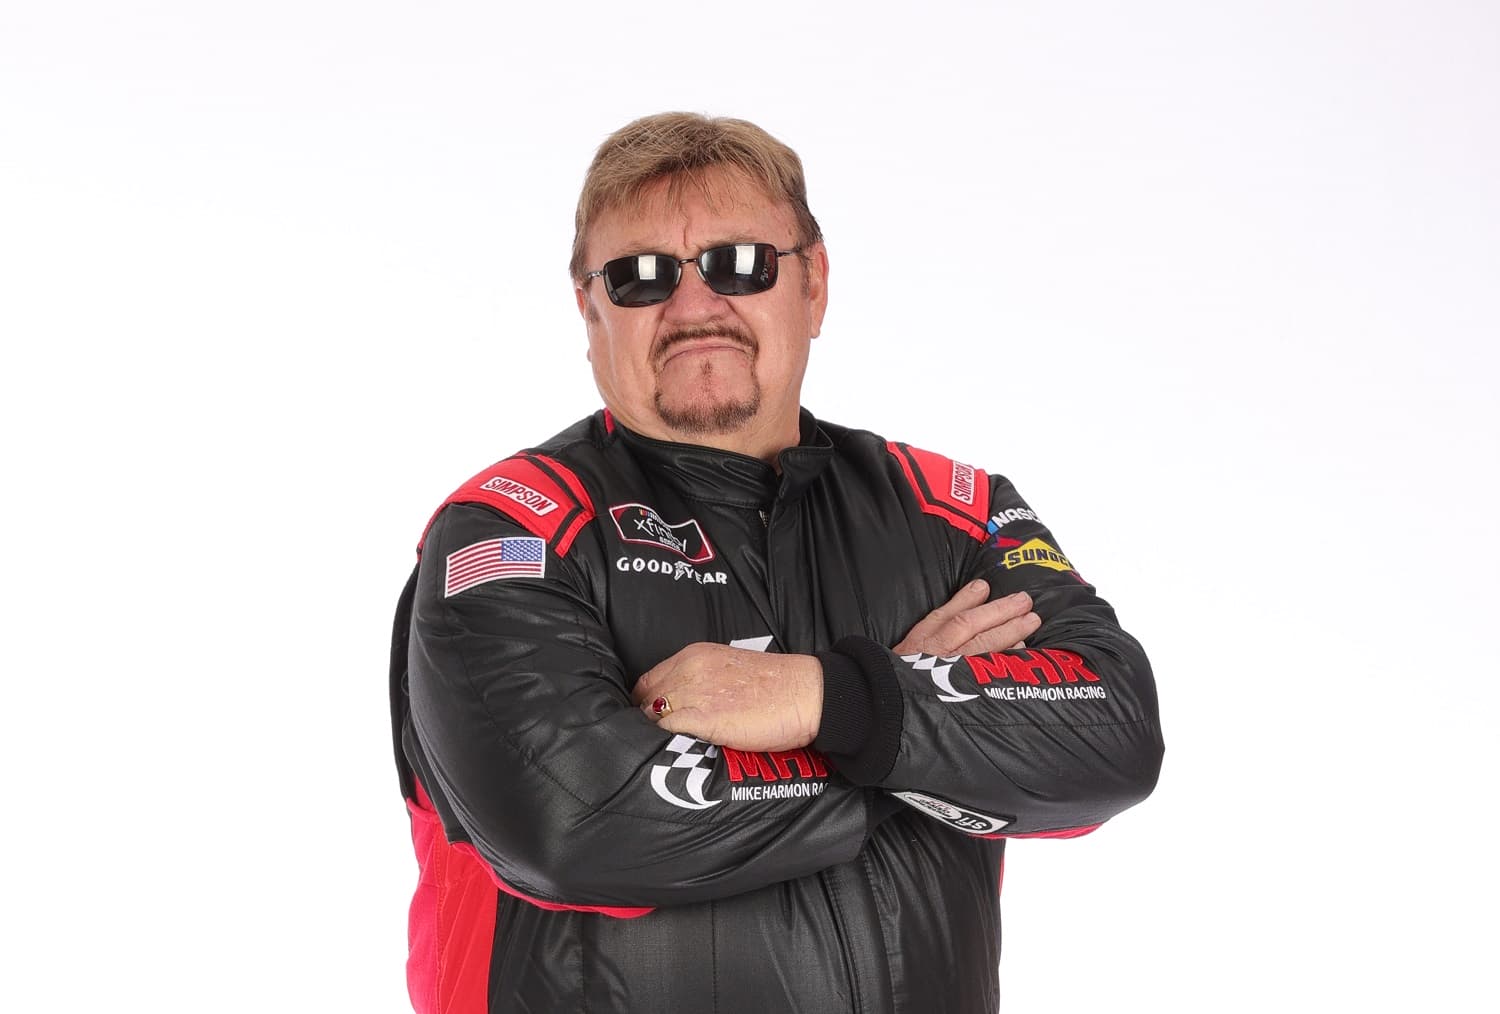 Mike Harmon poses for a photo at Daytona International Speedway on Feb. 13, 2020. | Chris Graythen/Getty Images